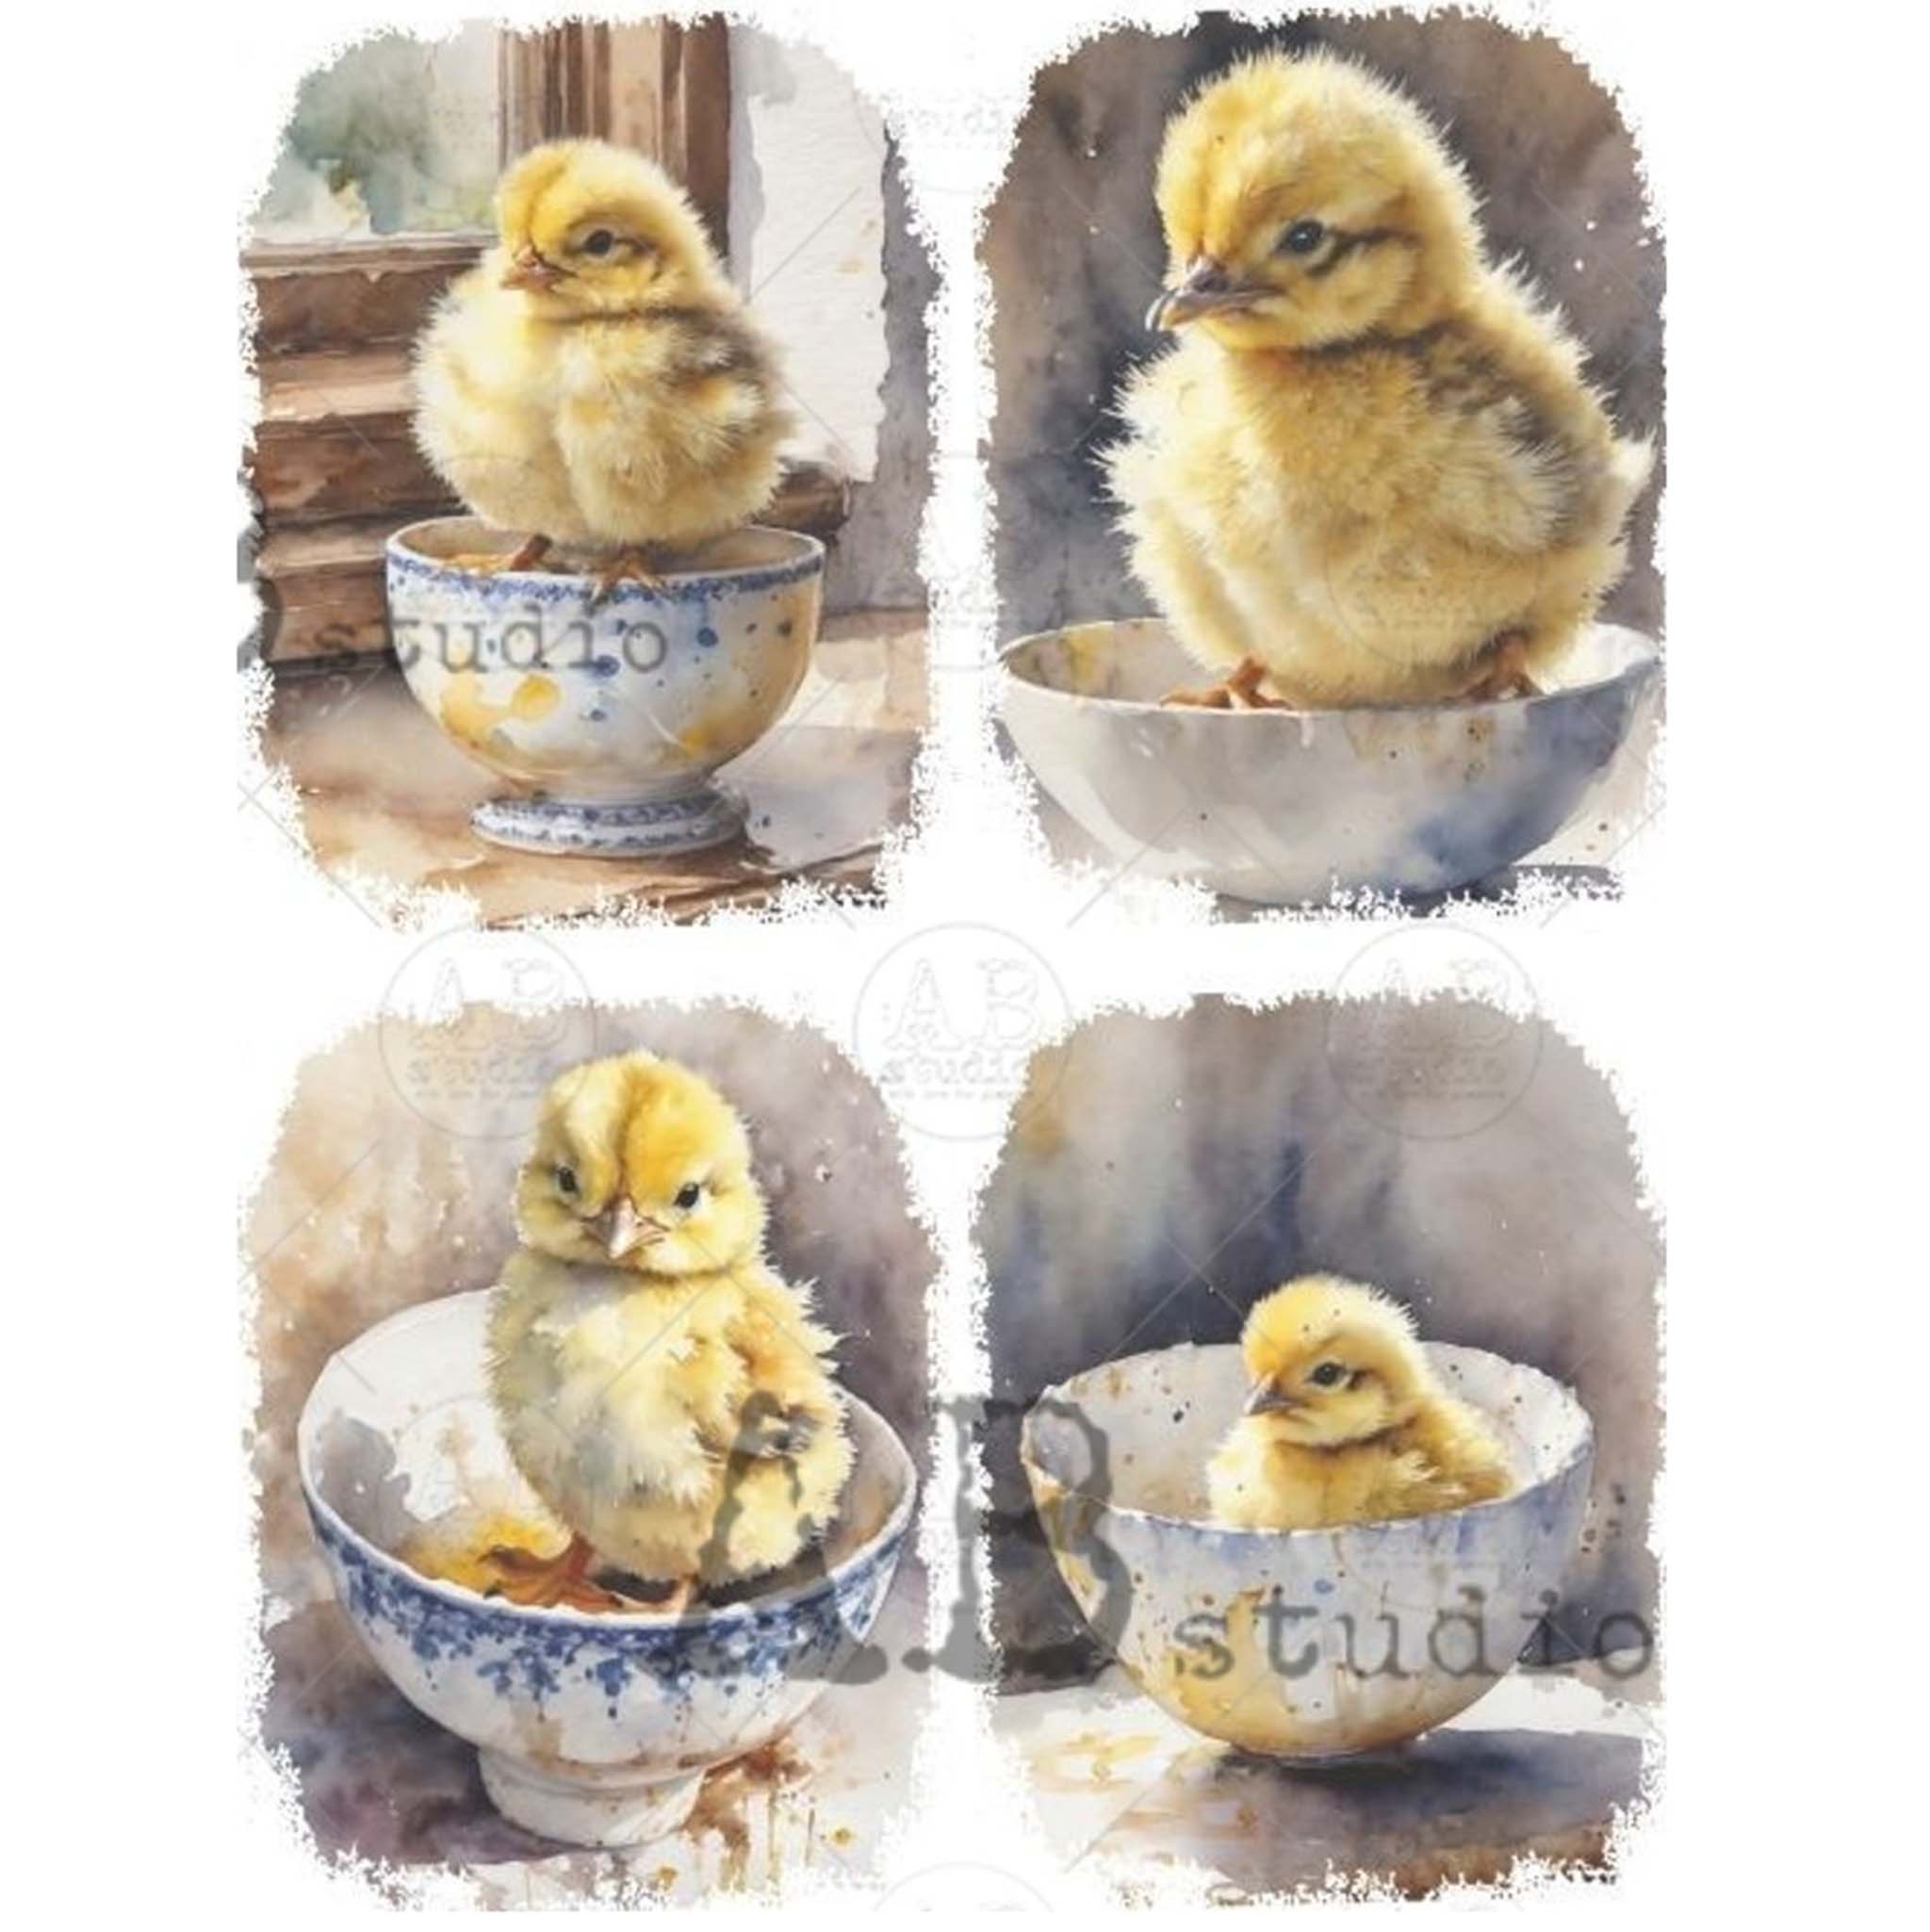 A4 rice paper design that features 4 adorable images of yellow chicks sitting in teacups are against a white background.